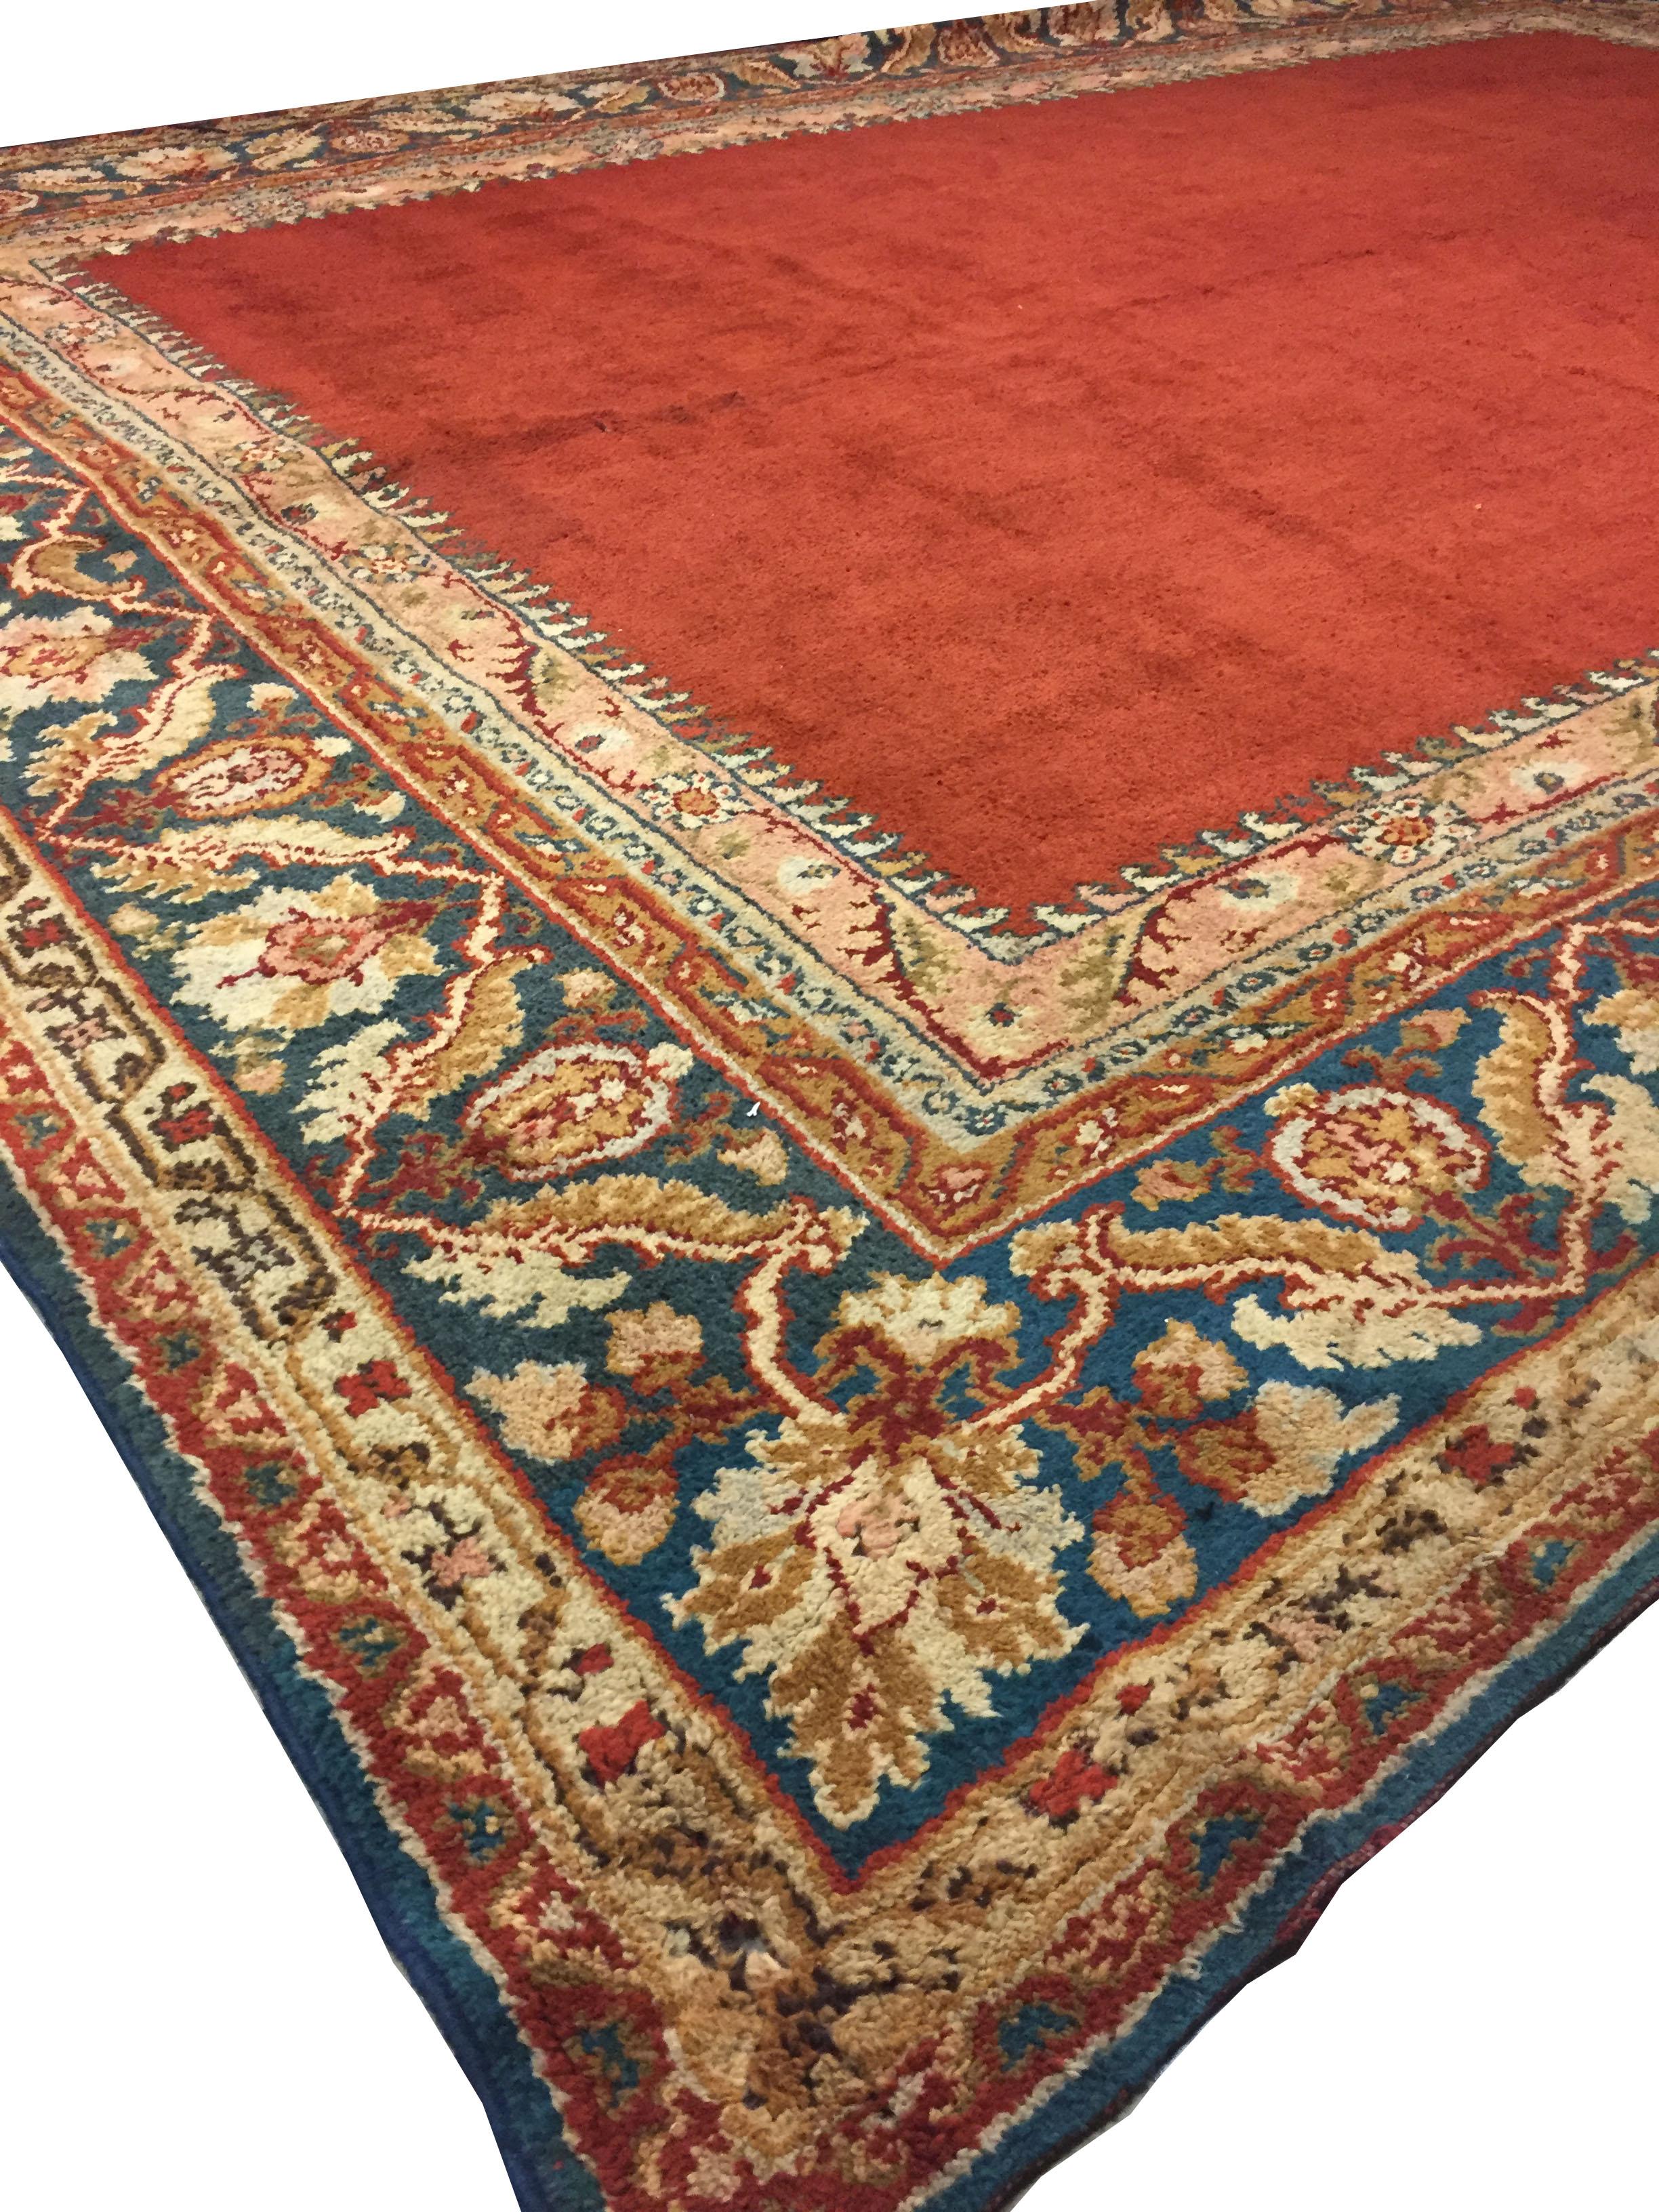 Large European Oushak Design rug. A Turkish Oushak style rug hand knotted in Europe probably Spain. Measures: 12'4 x 16'1.